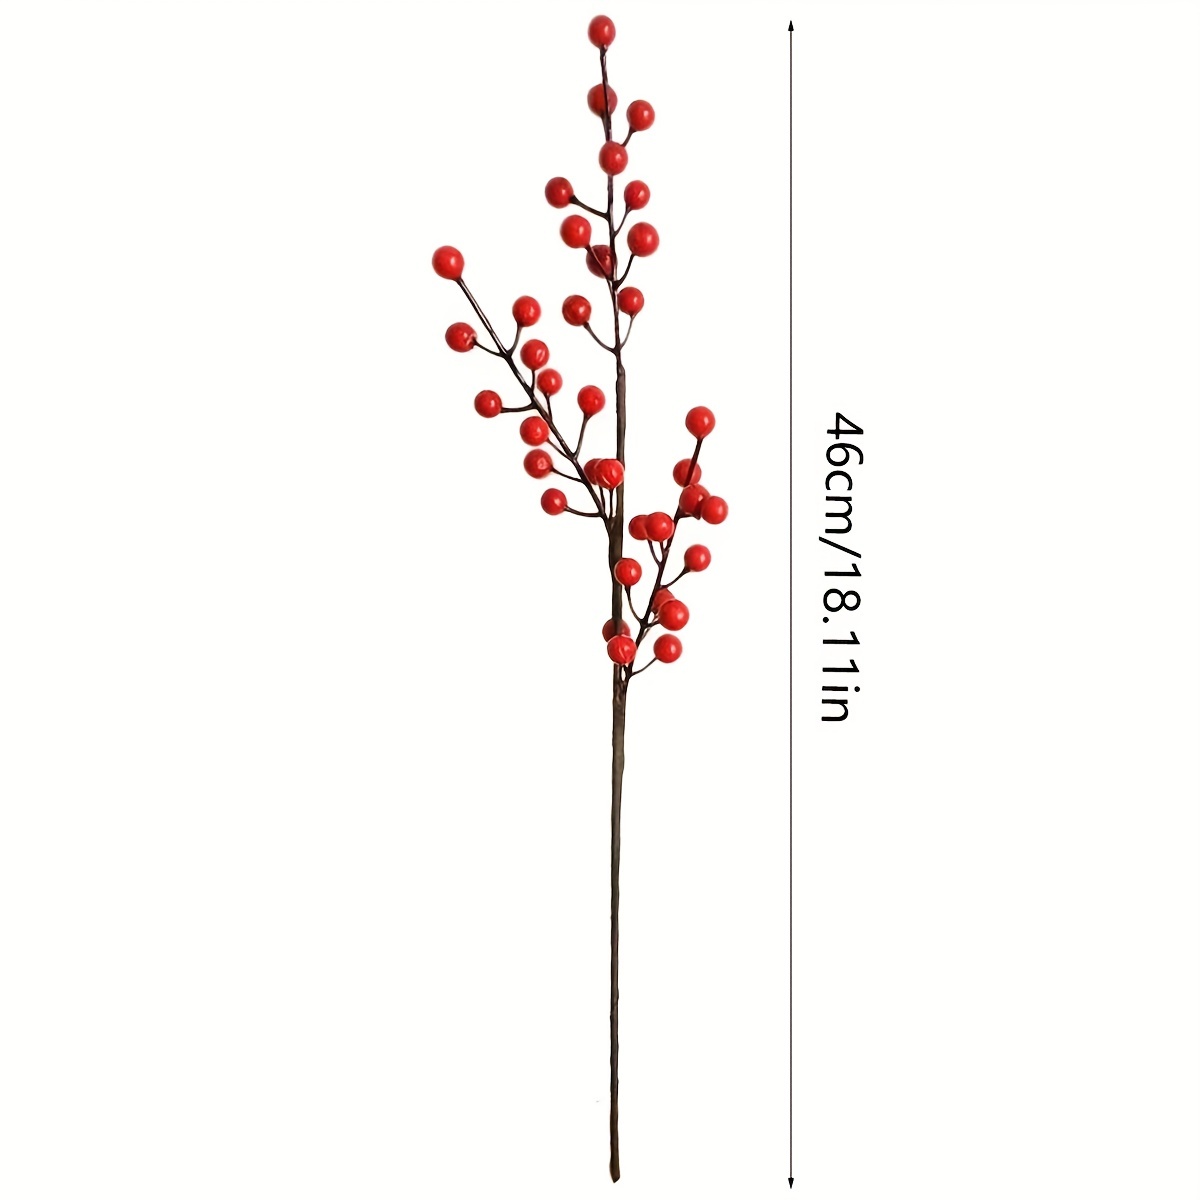 10pcs Artificial Red Berry Stems Durable Holly Christmas Berries